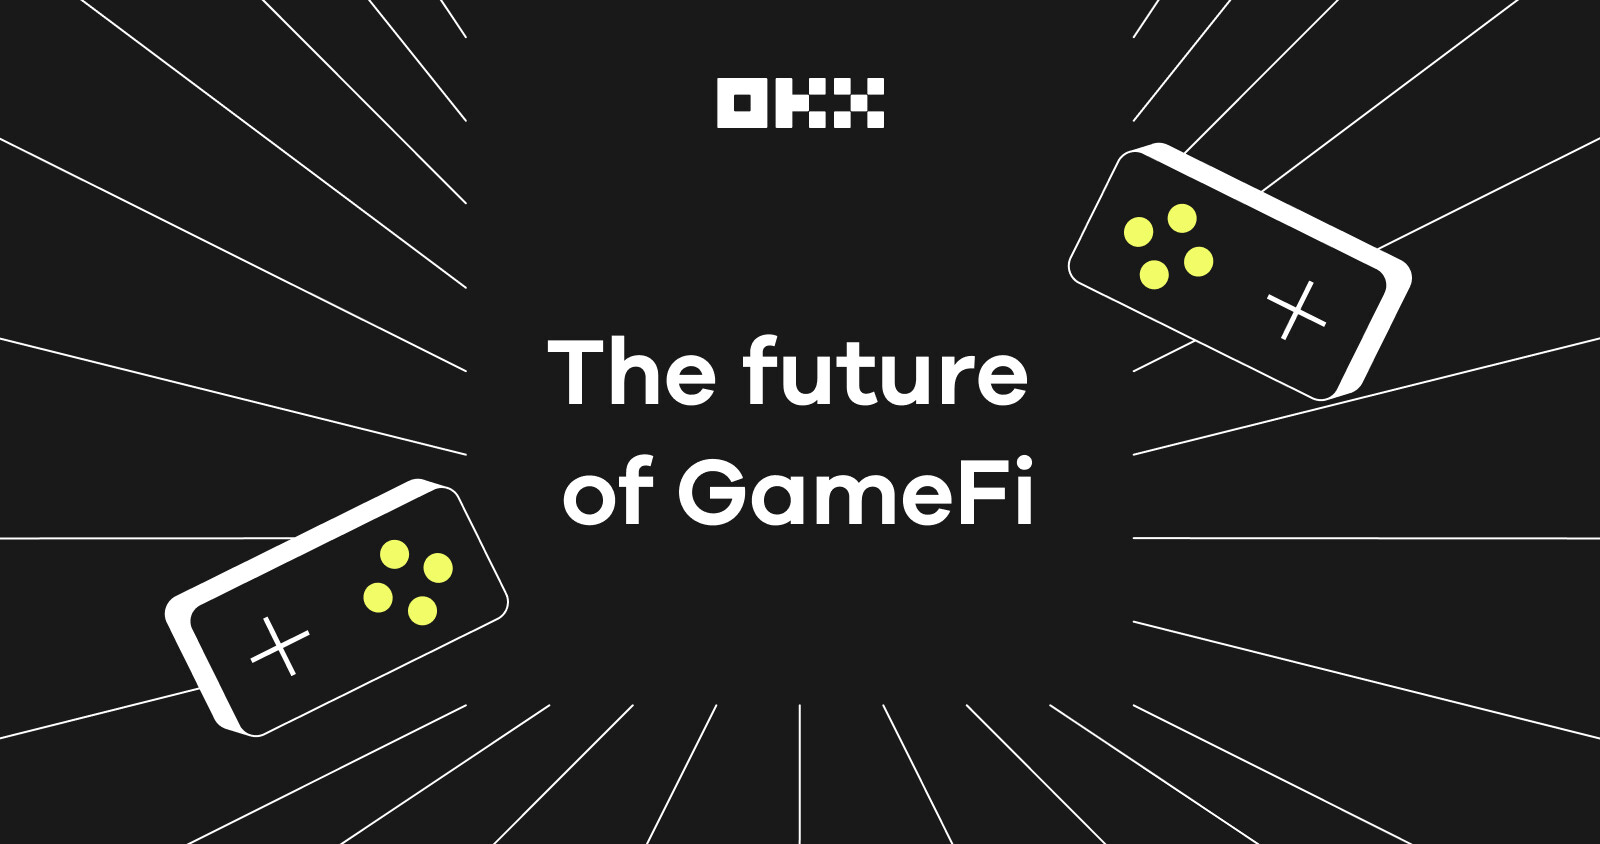 Can GameFi become sustainable?